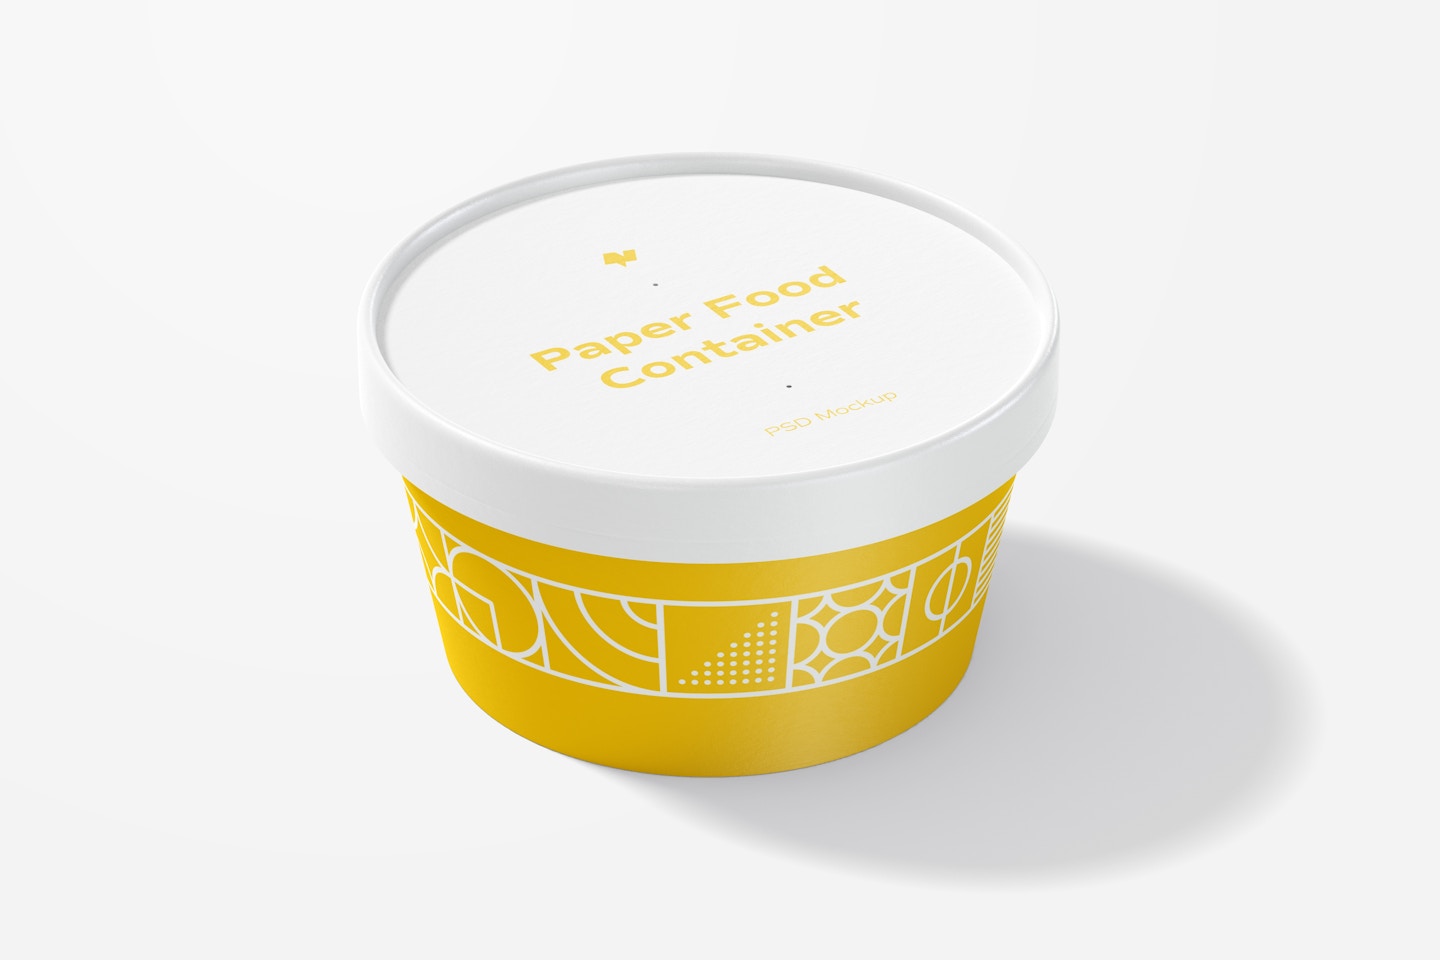 Round Paper Food Container Mockup